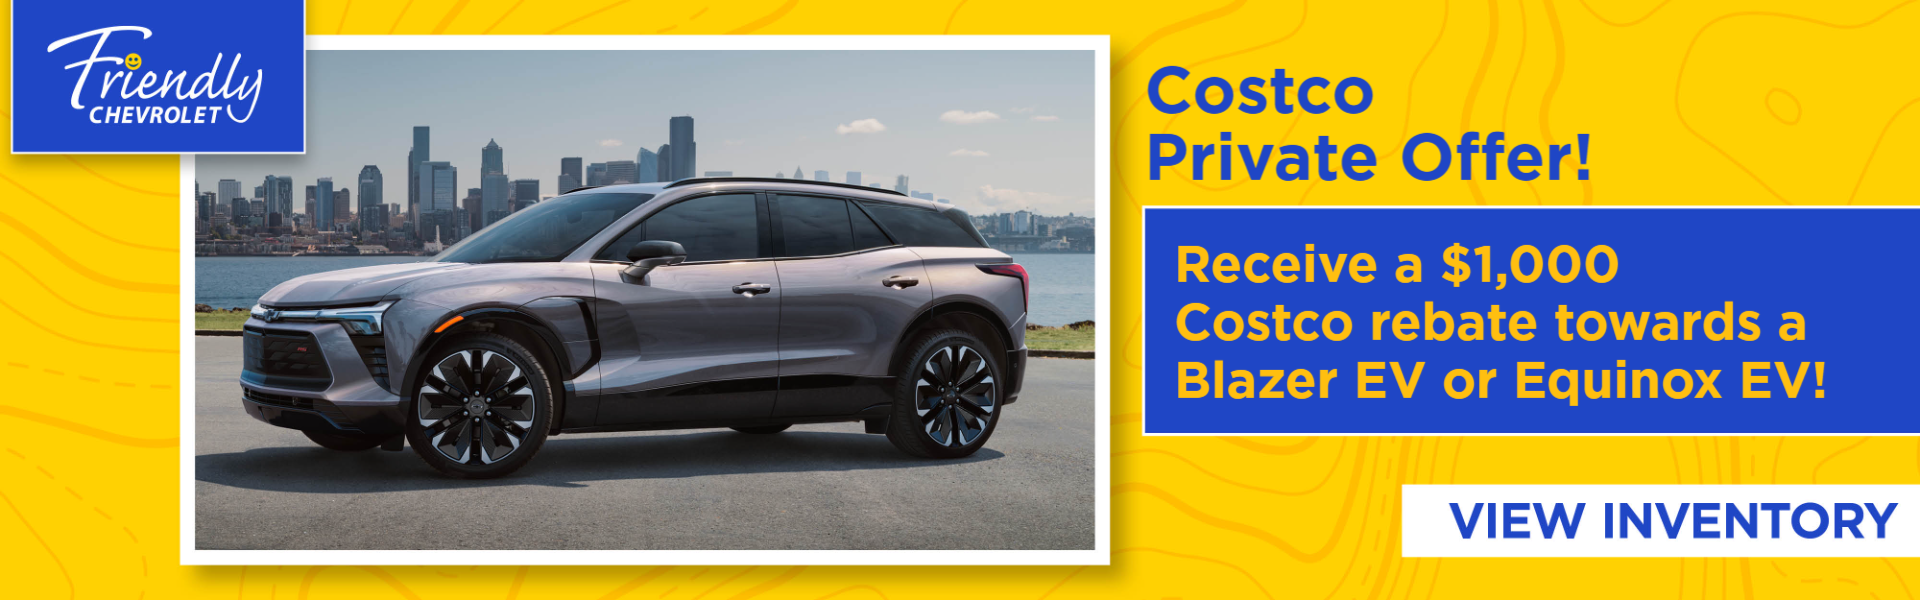 May Costco Private Offer